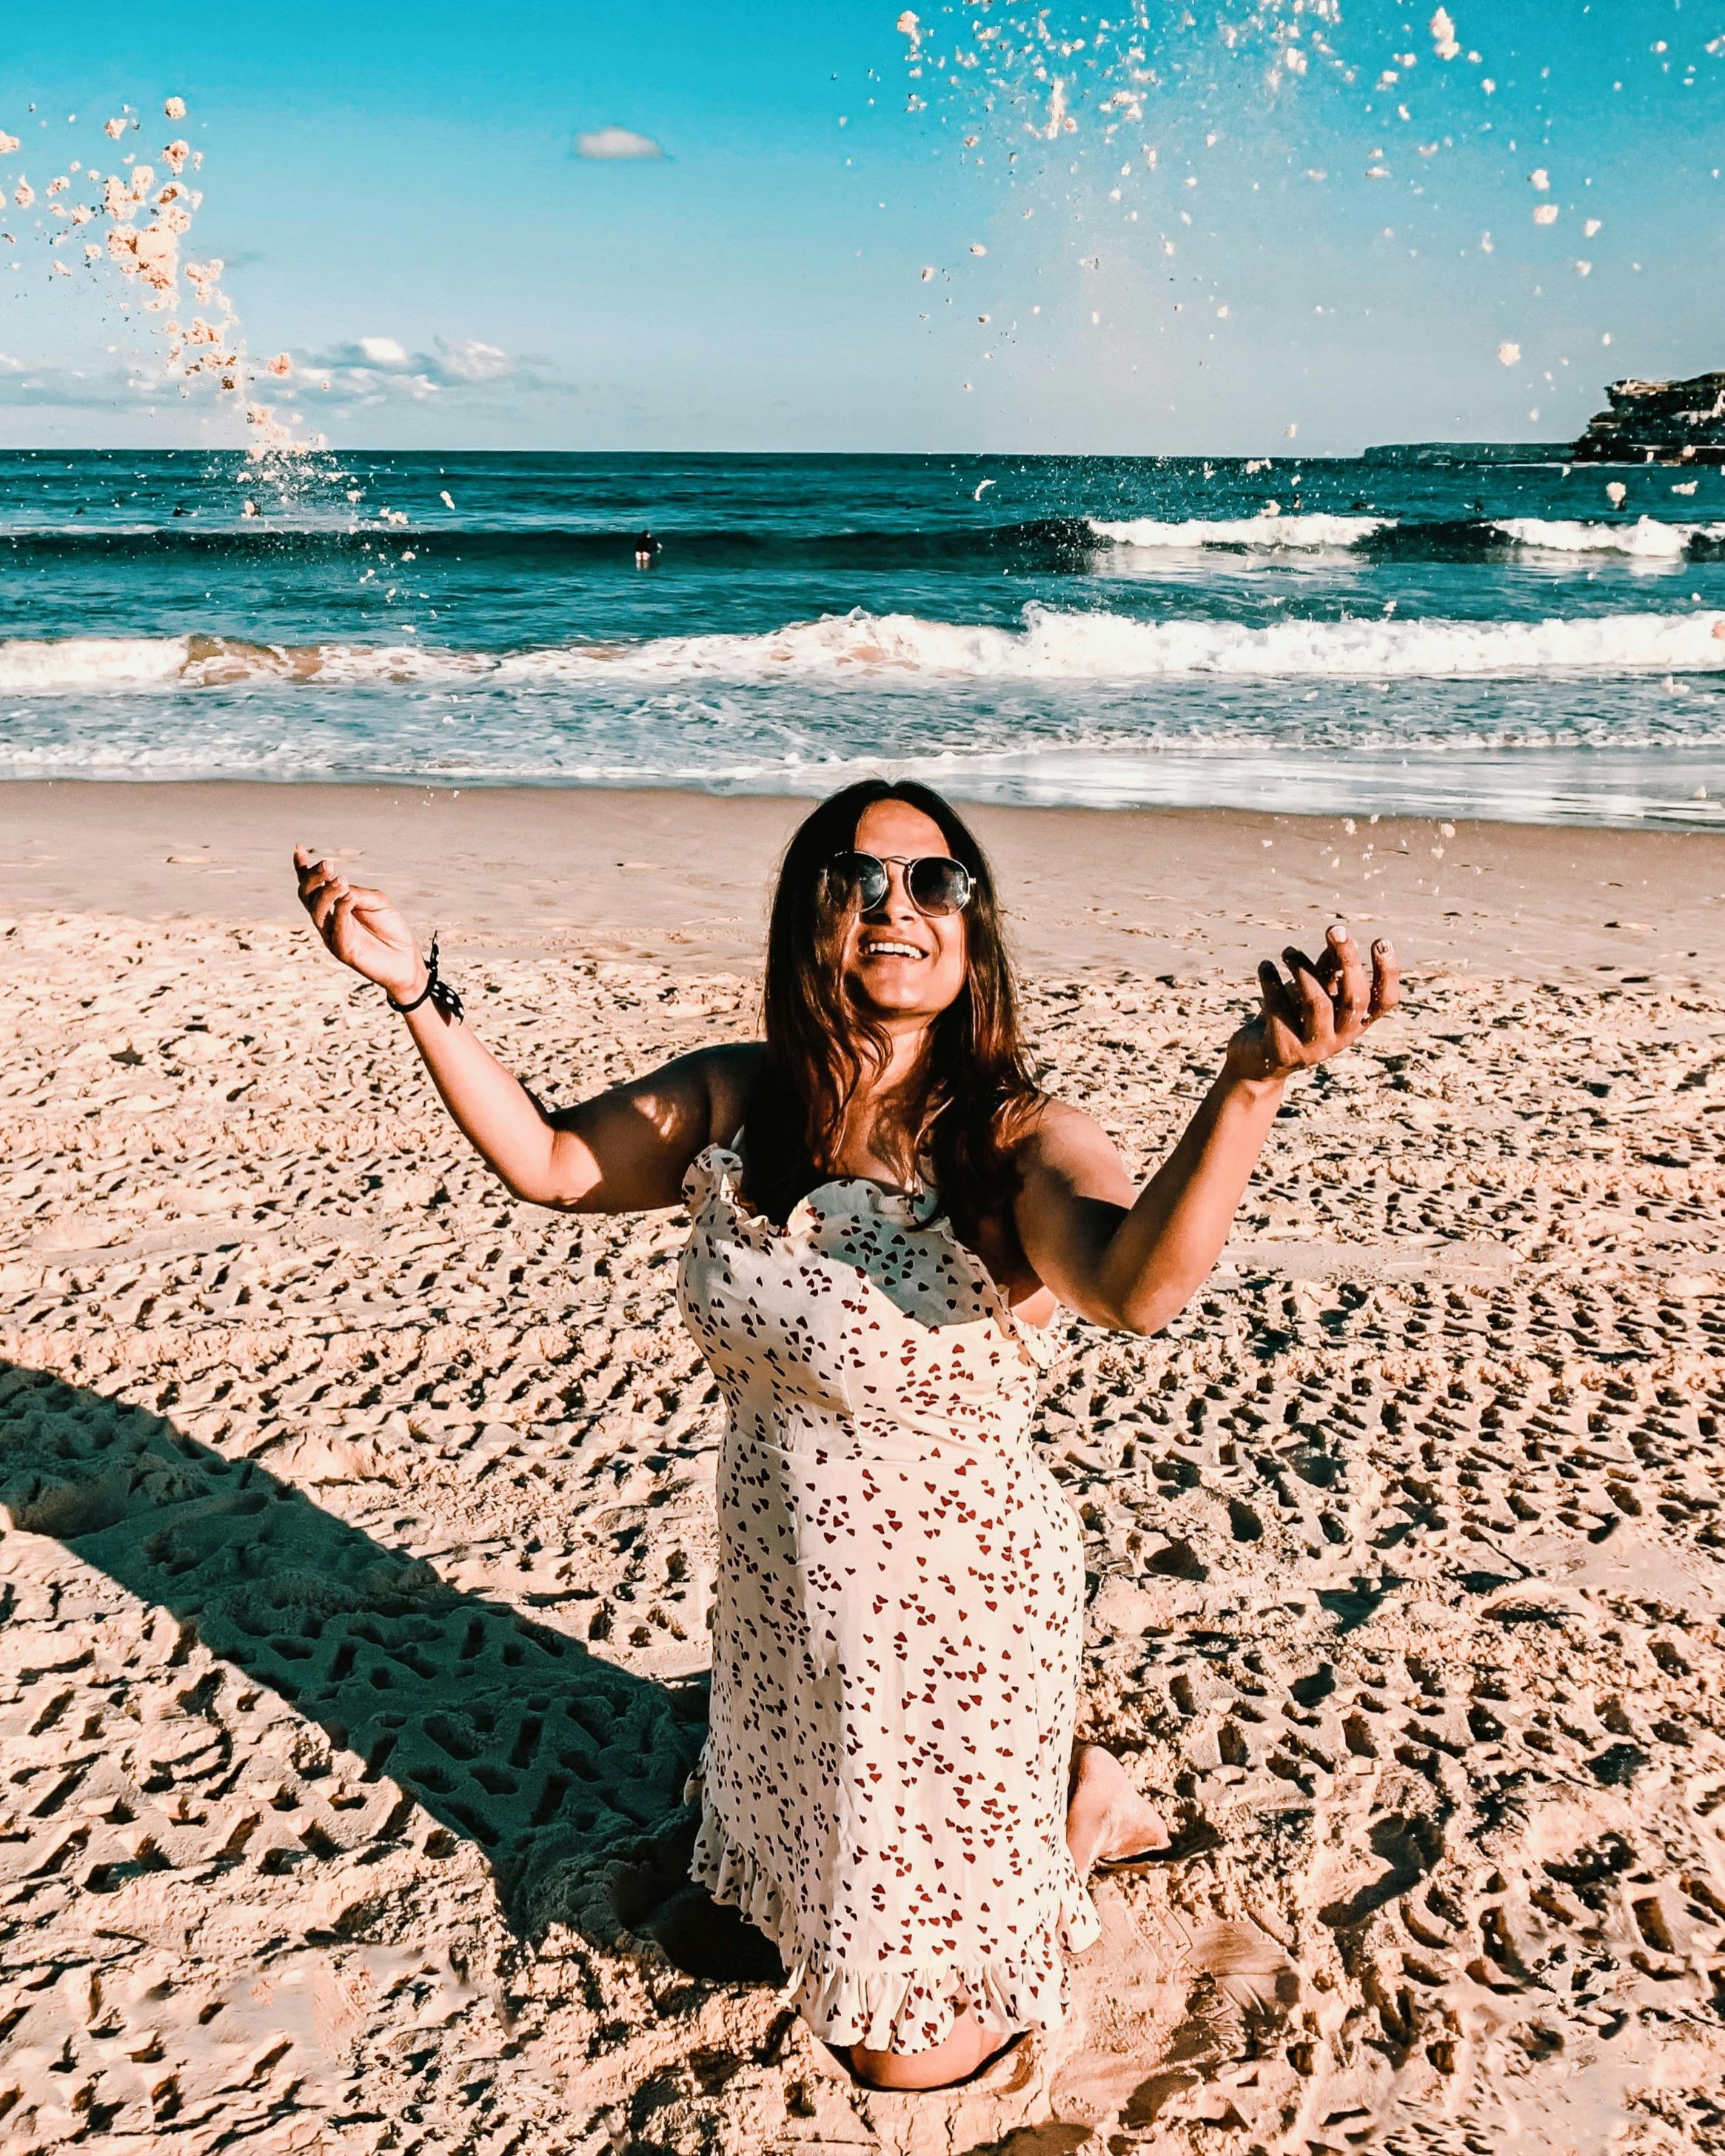 beach Instagram picture ideas for travel girl - Girl Photography poses | Beach  instagram pictures, Travel pose, Instagram pictures